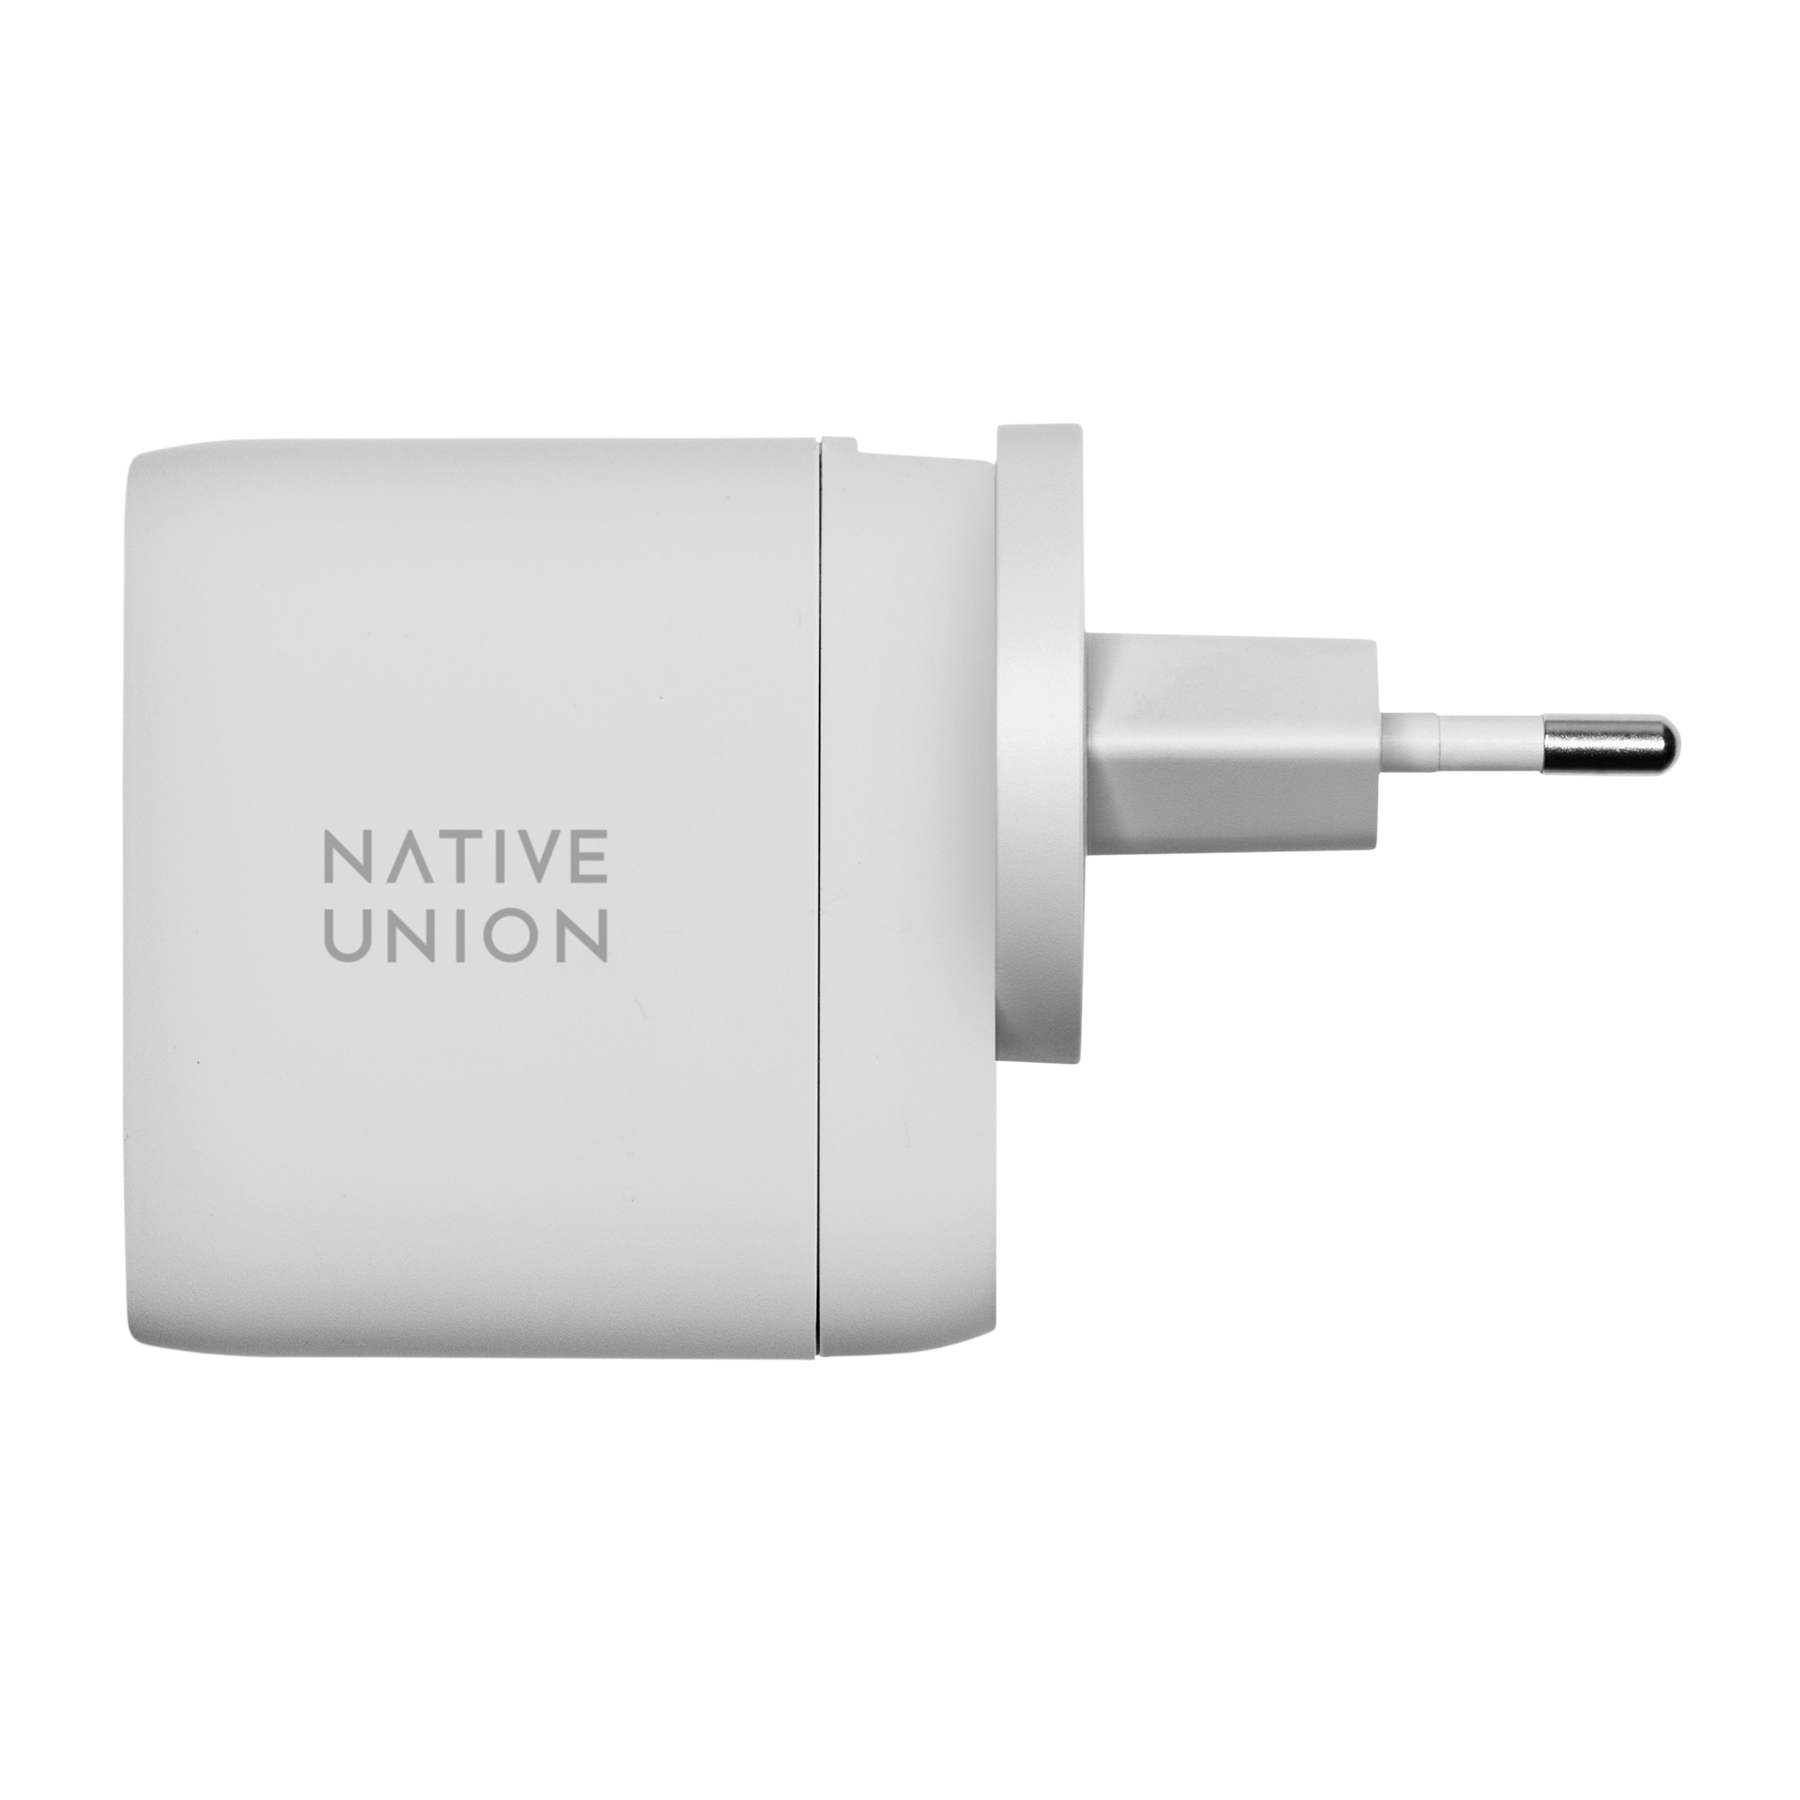 Native Union Fast GaN Charger PD 67W – Ultra-Compact Multi-Device Power  Delivery Enabled USB-C Charger Up to 67W – for MacBook Pro, iPads, iPhones